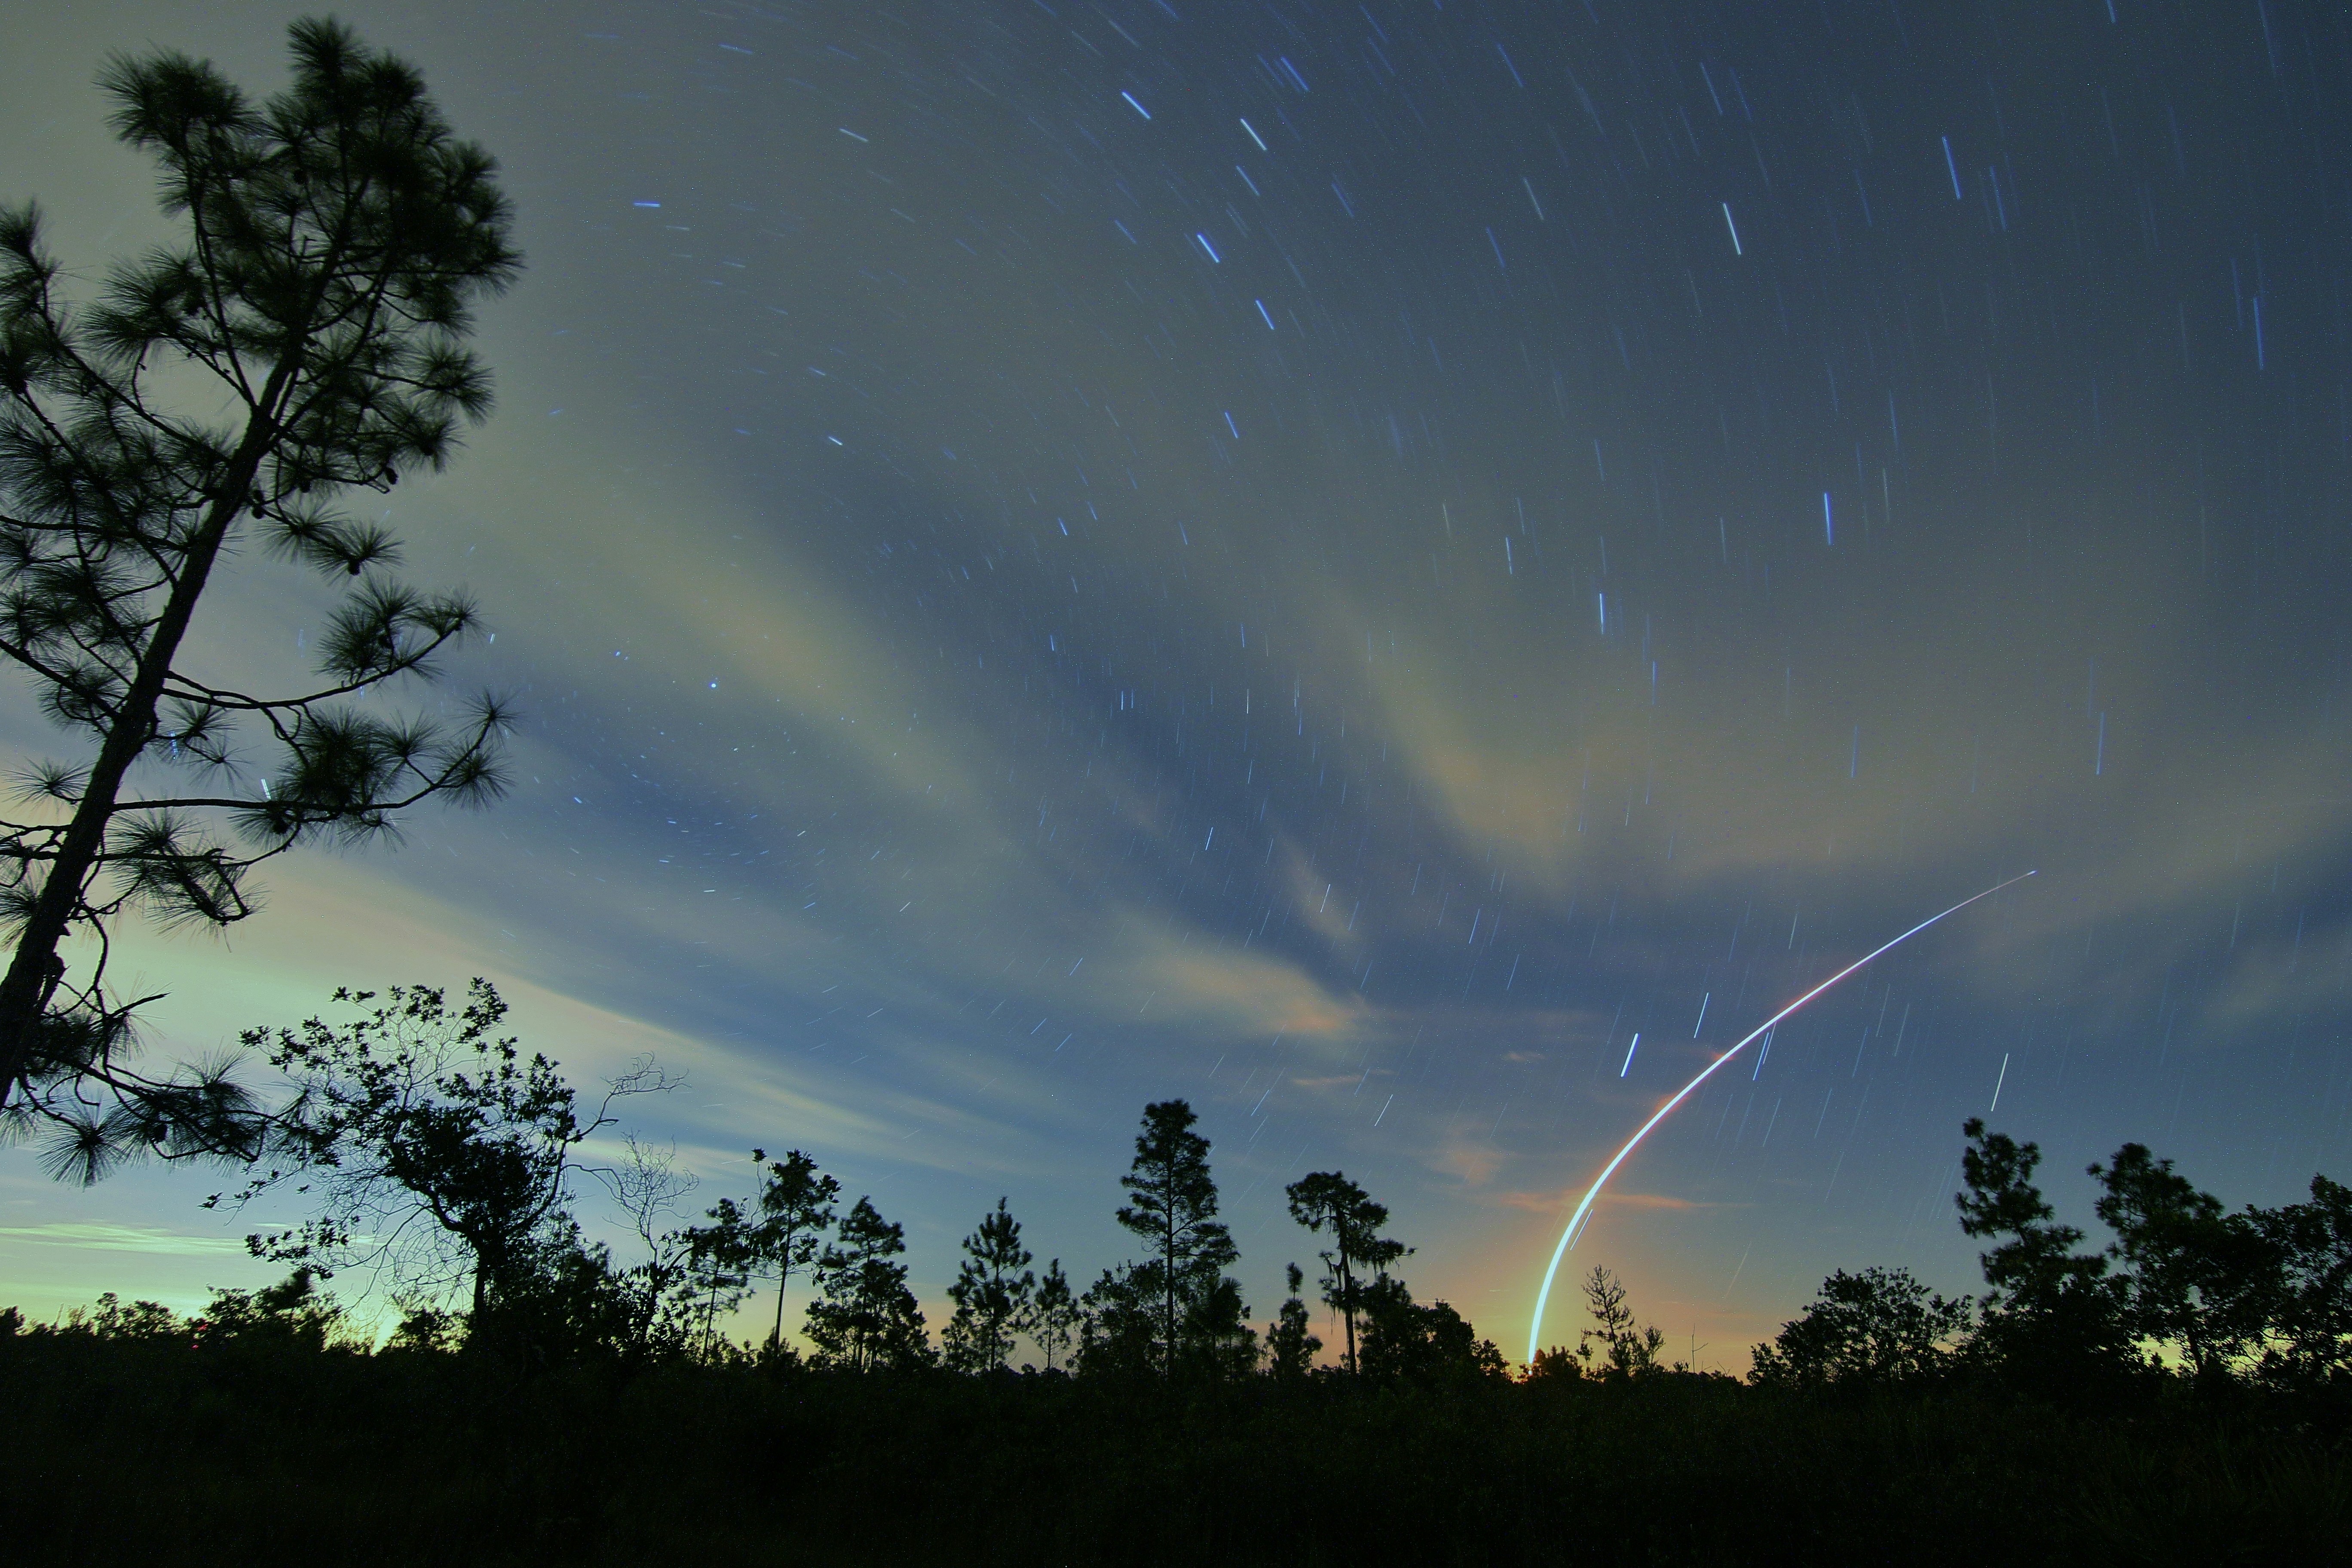 Even though it was cloudy, I decided to give it a try. Launch was delayed a bit due to lightning in the area. The picture was taken a my campsite at River Ranch Fl. Figured a long exposure to add some star trails.